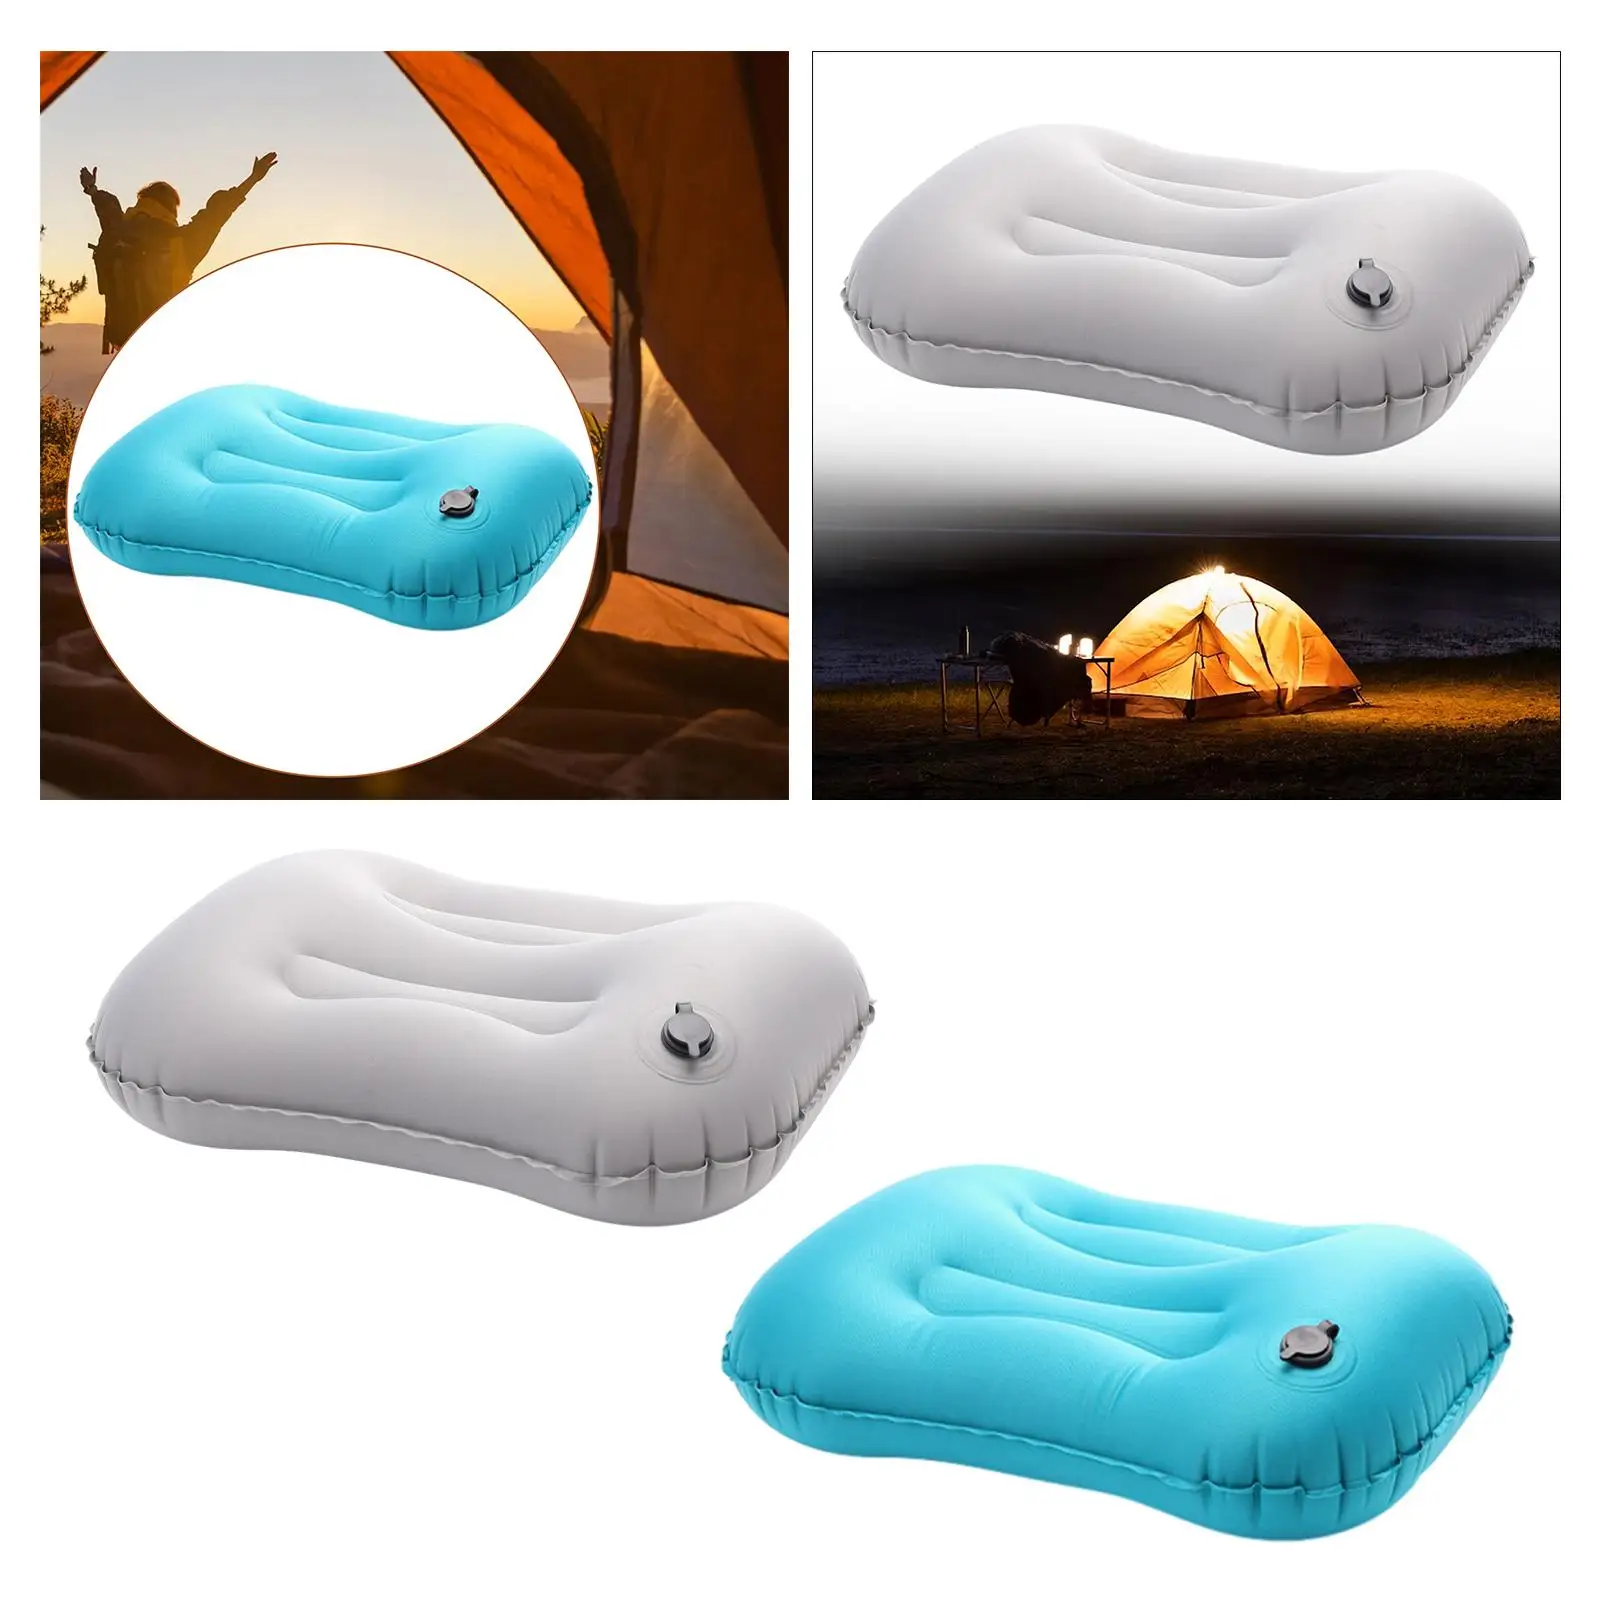 Inflatable Camping Pillow Portable for Neck Lumbar Support Compressible Pillow for Outdoor Hammock Hiking Backpacking Beach